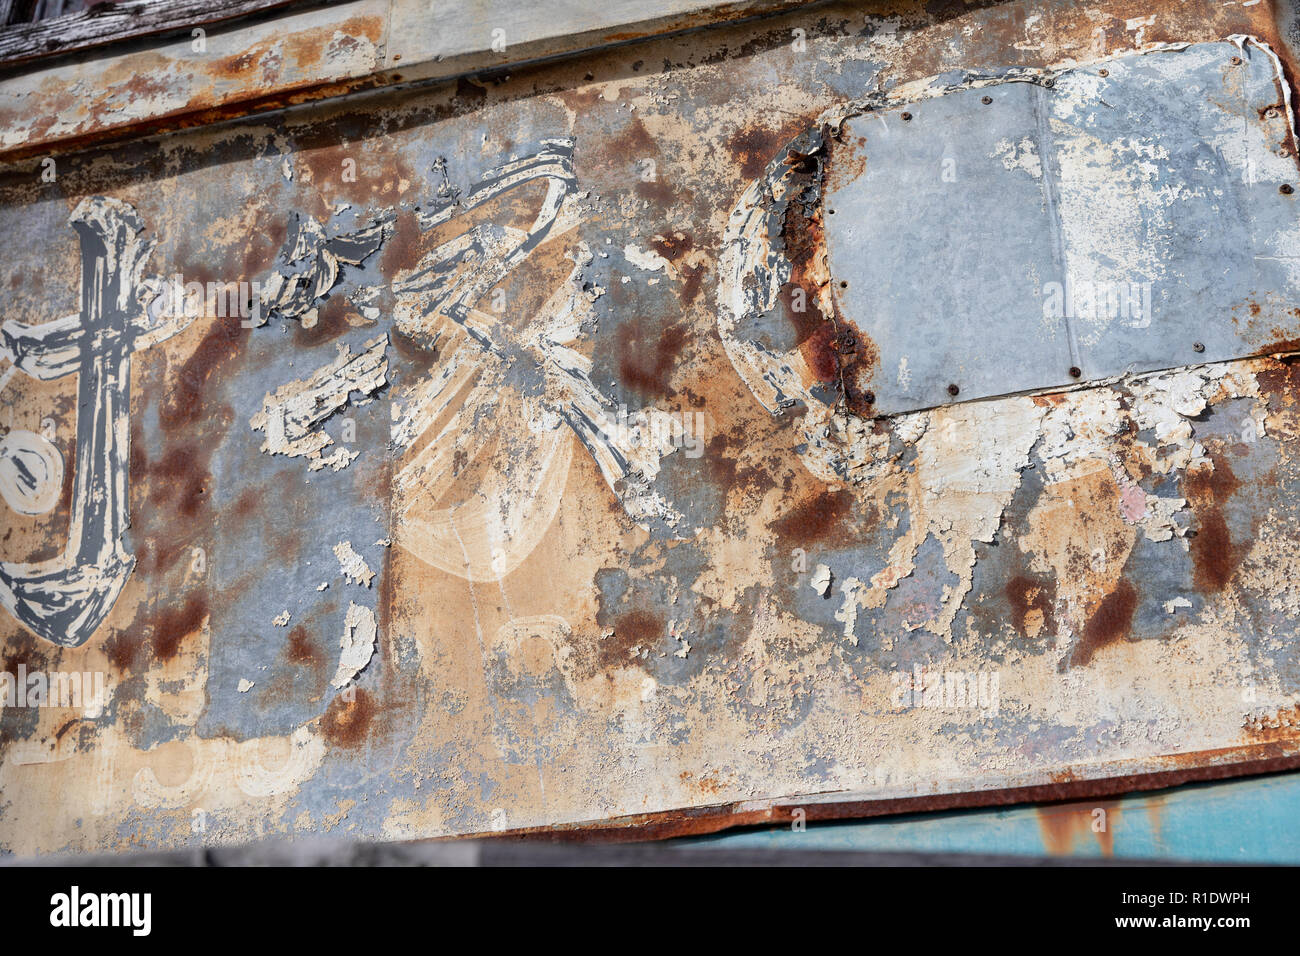 Rusty Japanese sign with peeling paint, detail; store front in Naha City, Okinawa, Japan Stock Photo